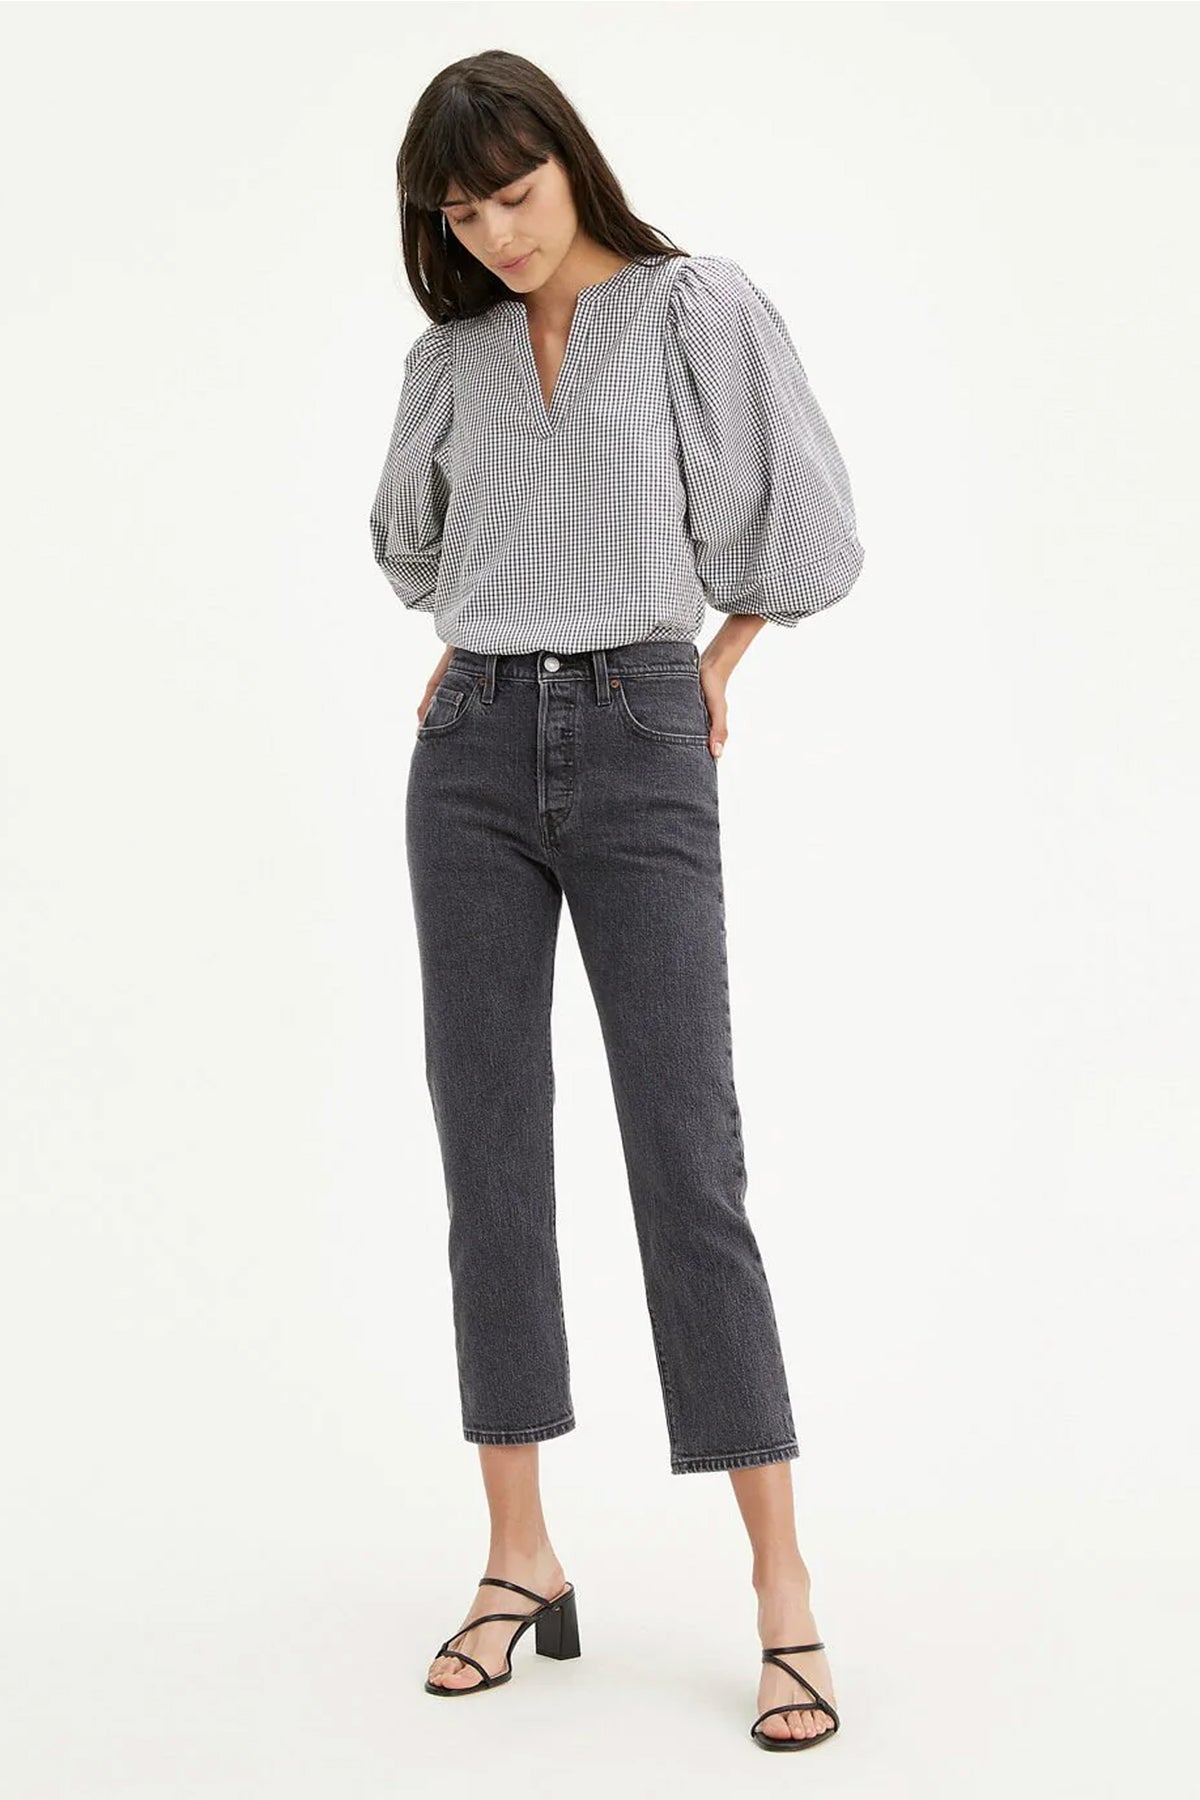 Levi's 501 Crop Mesa Cabo Fade – Somebuddy Loves You